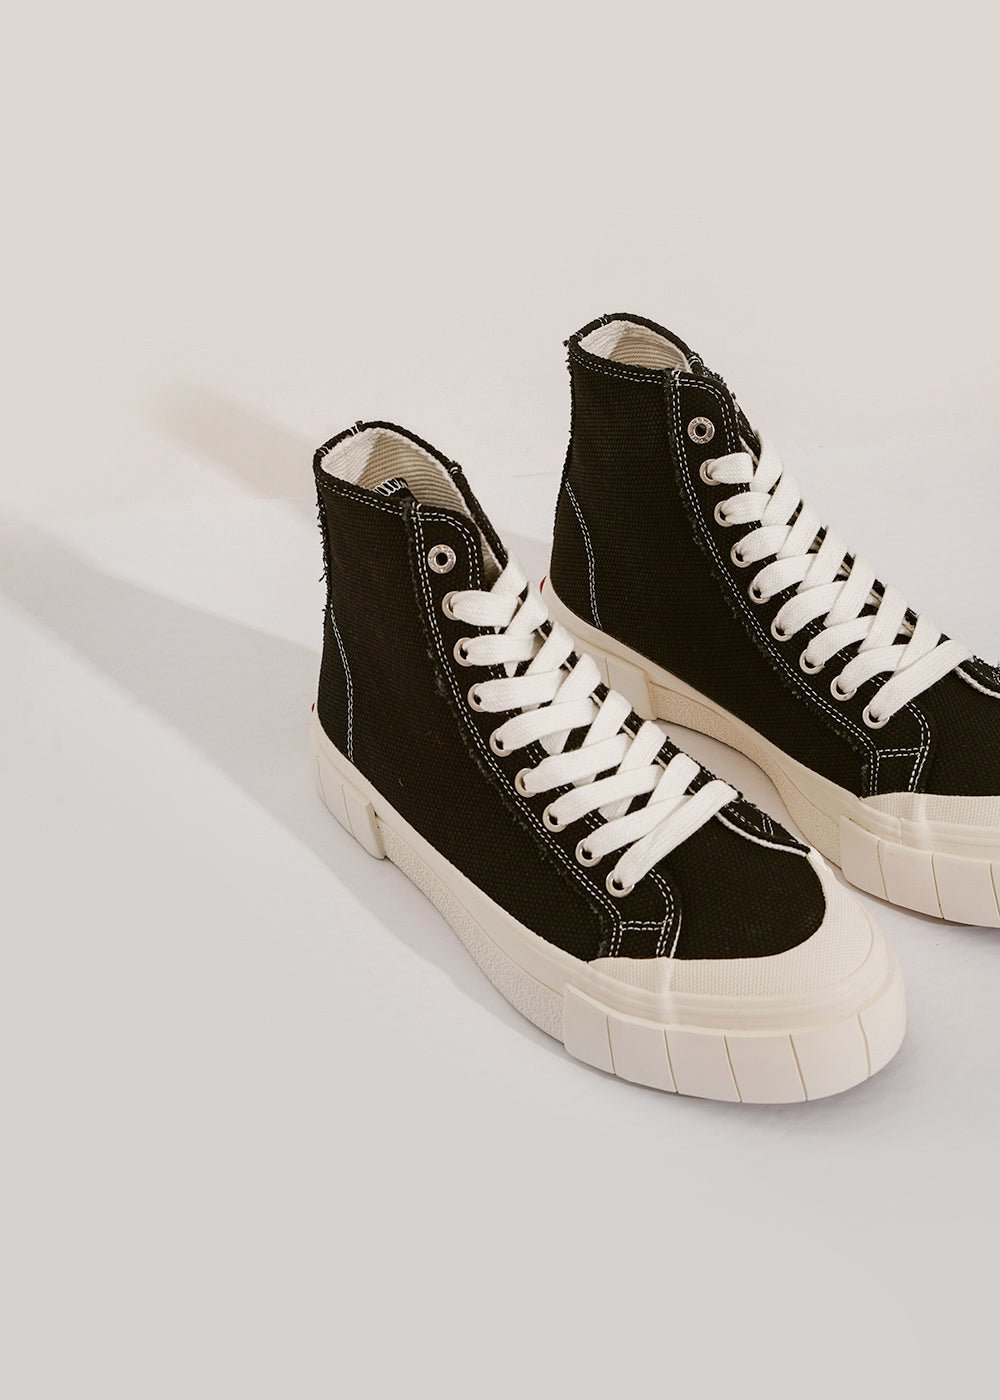 GOOD NEWS Black Palm Core Sneakers - New Classics Studios Sustainable Ethical Fashion Canada